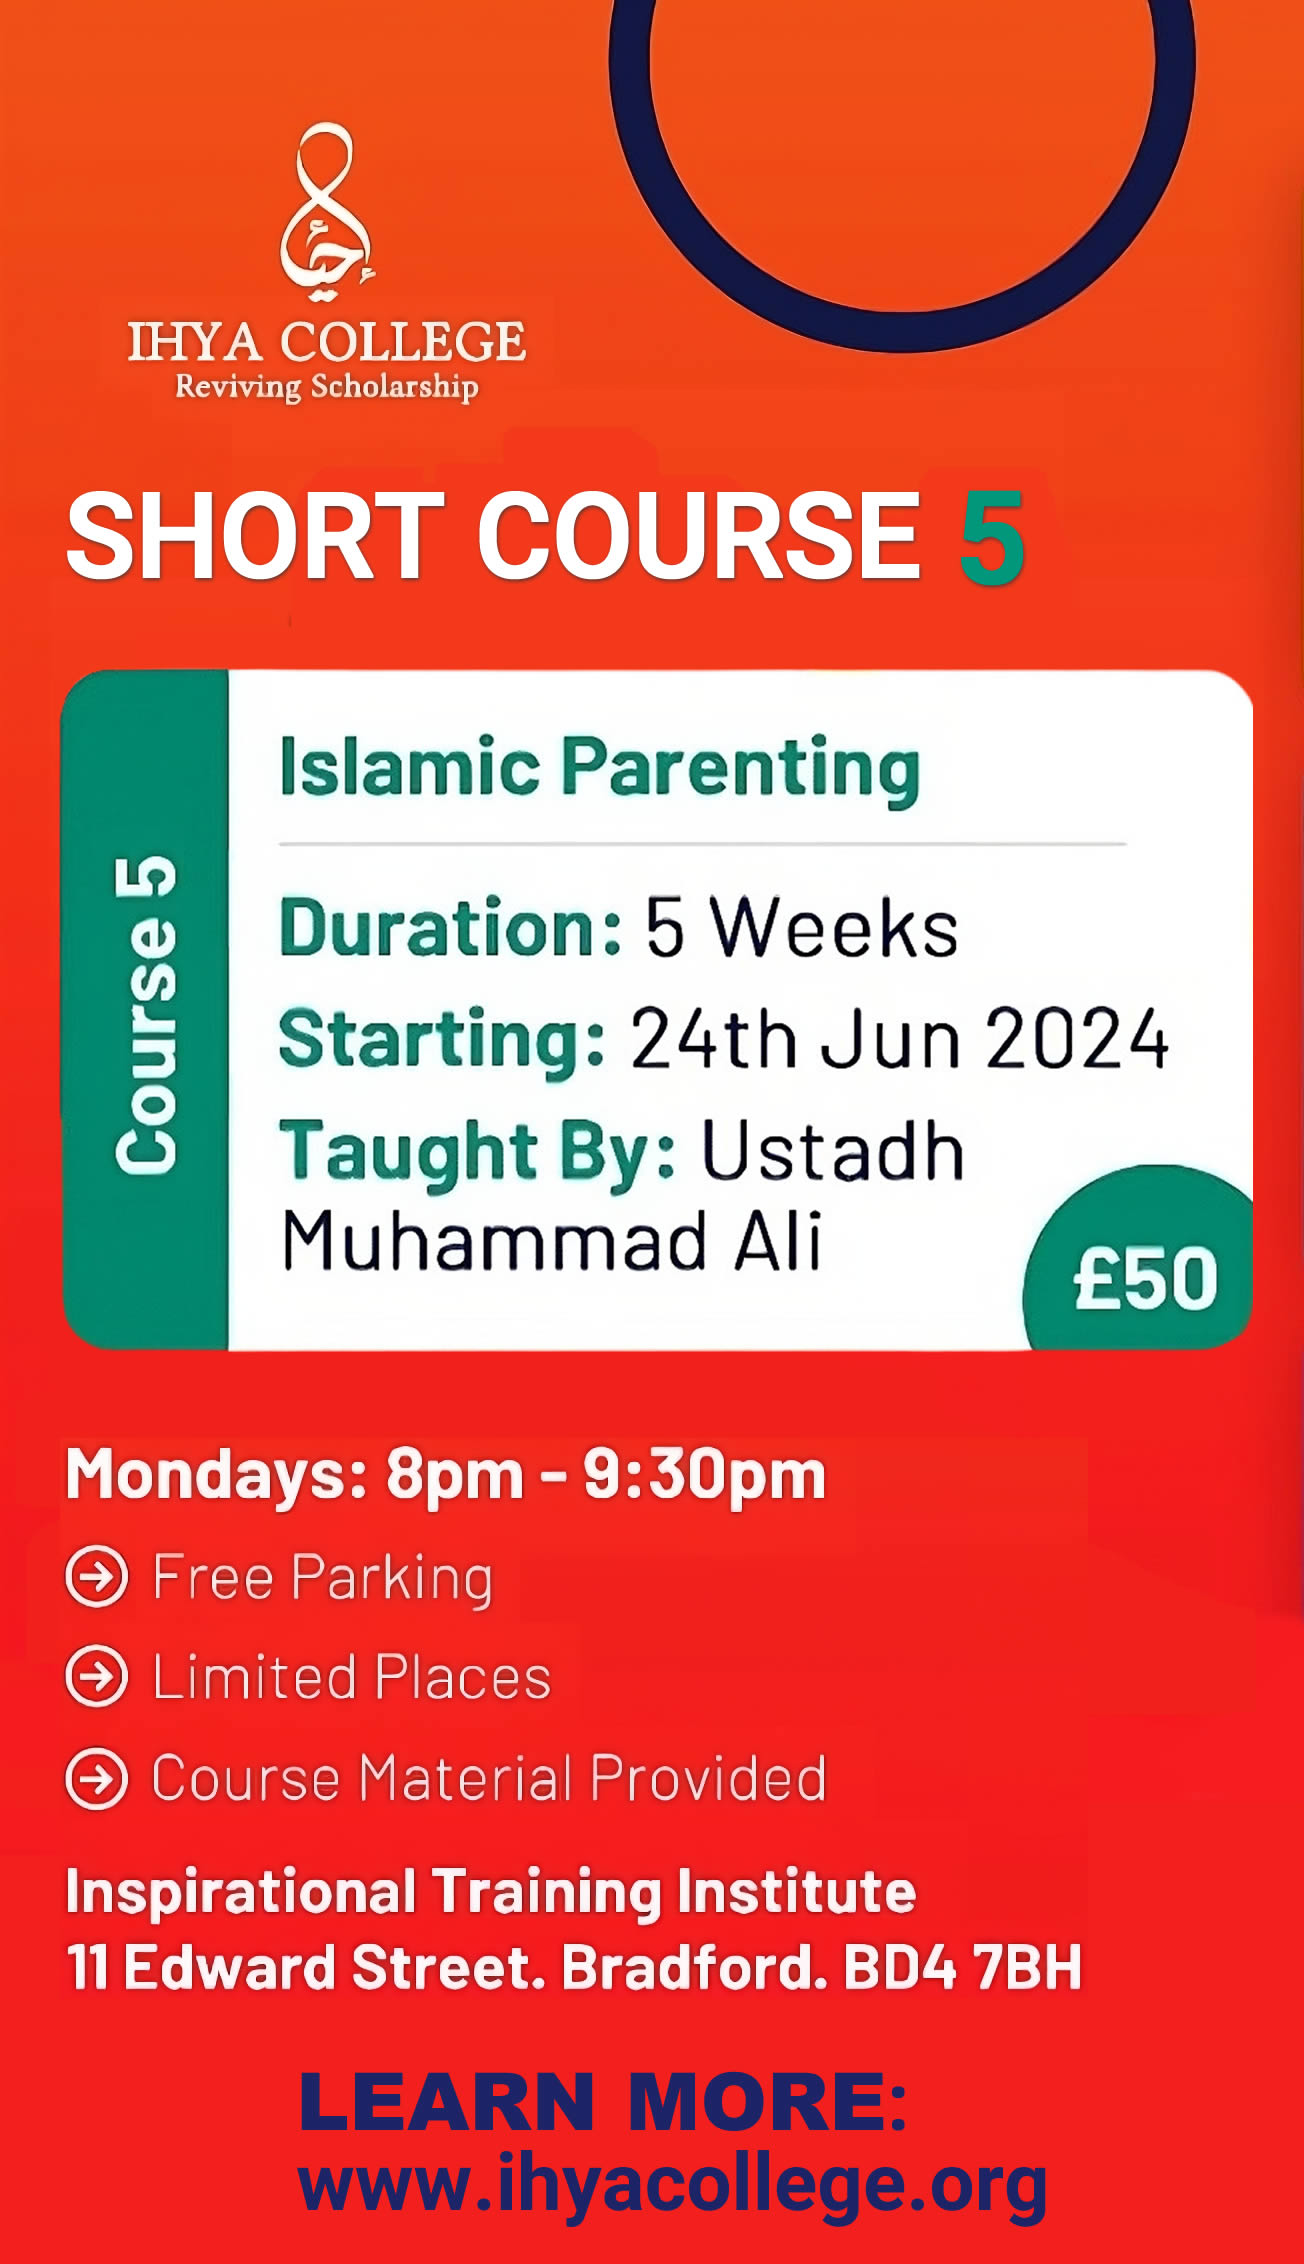 Islamic Parenting - Ihya College short course